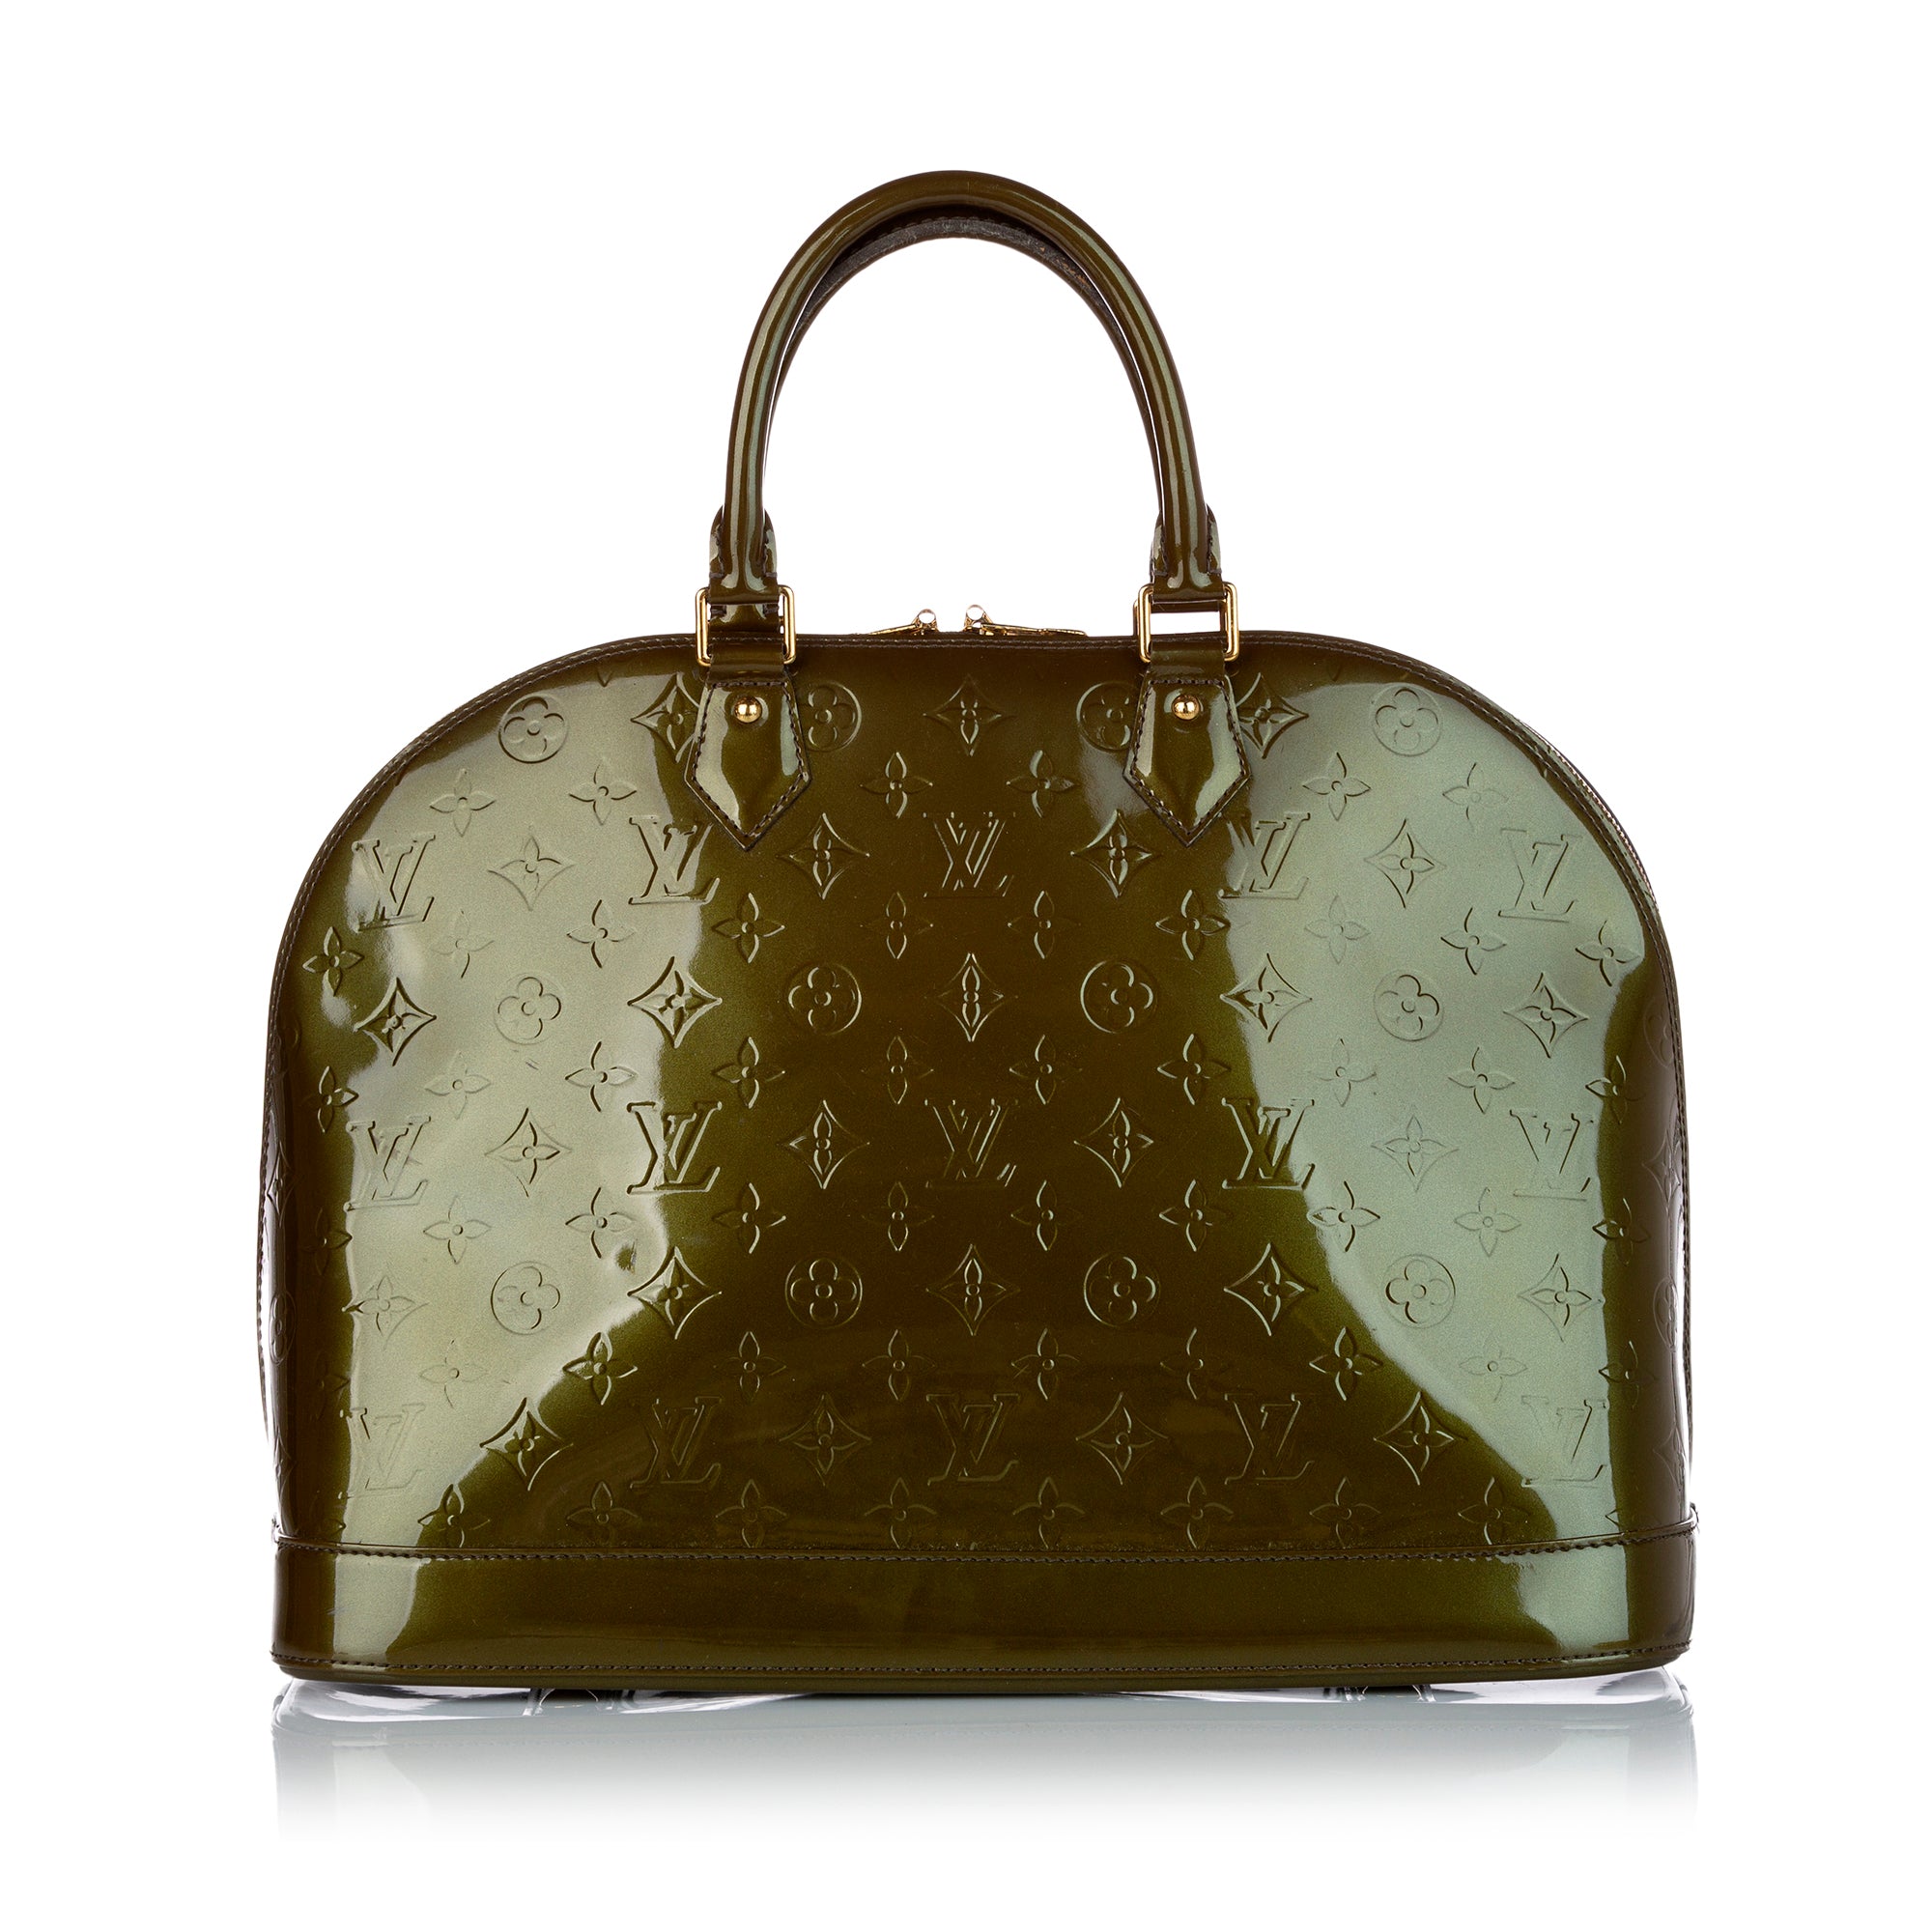 Louis Vuitton Bellevue GM Vernis Olive Green Patient Leather Handbag Added Insert Preowned